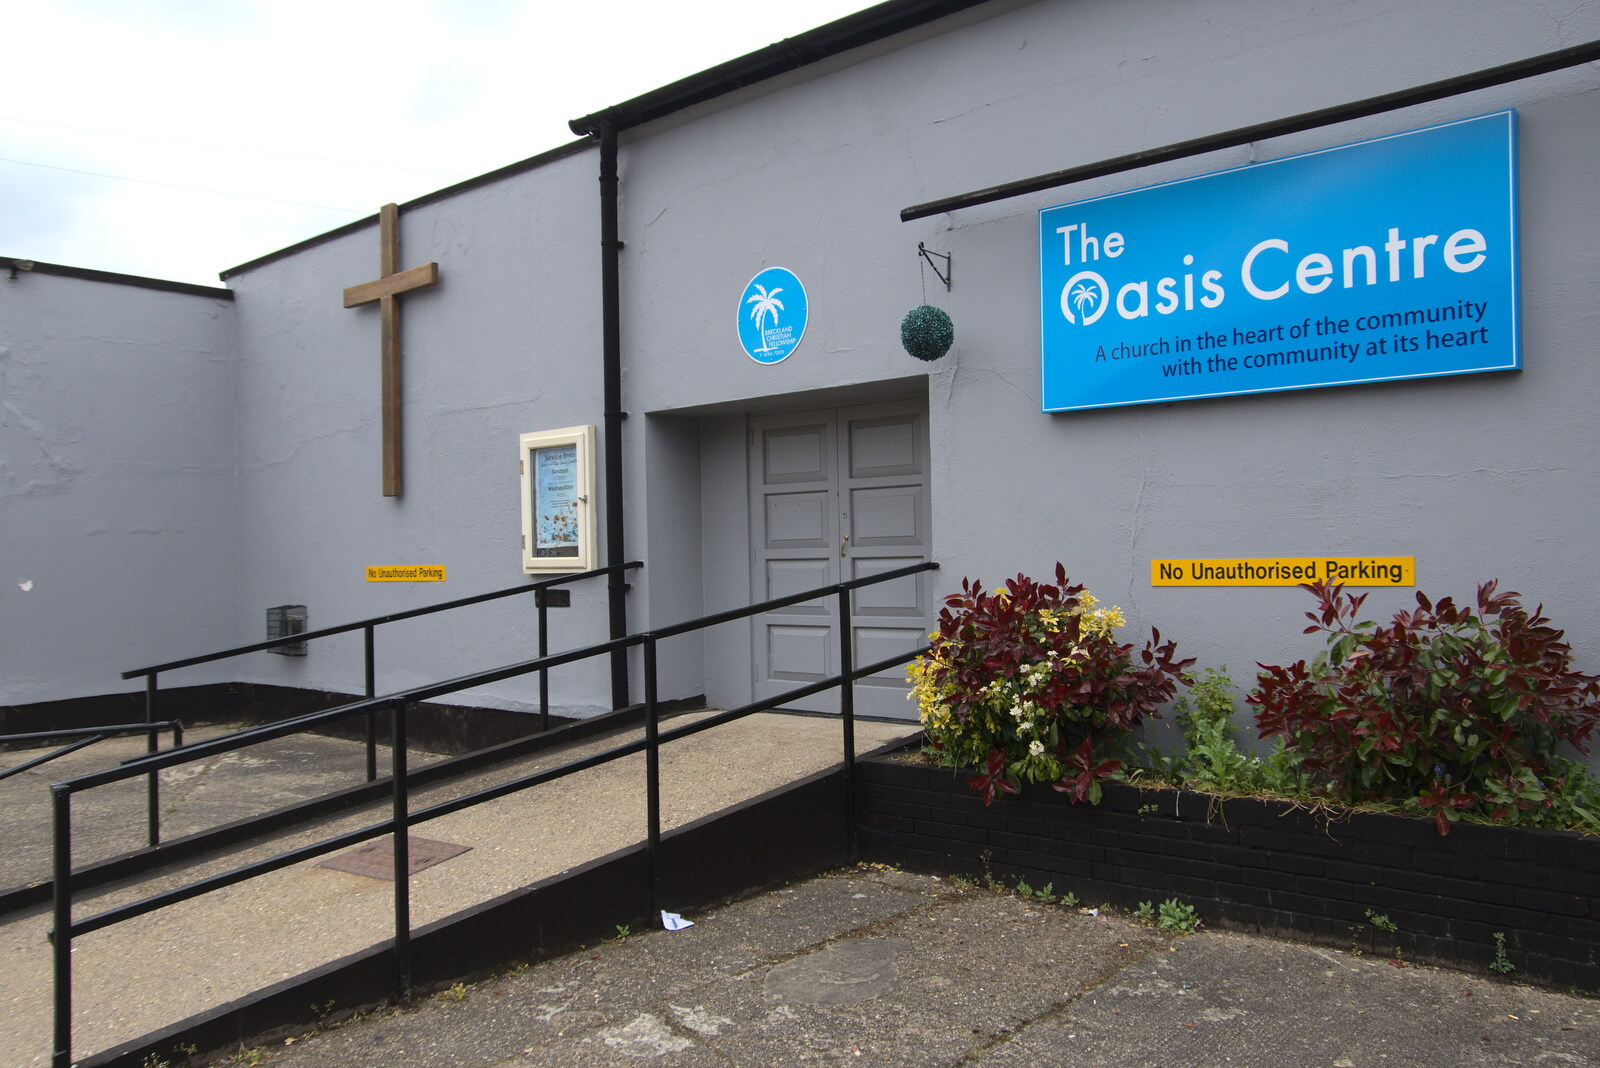 The very grey Oasis Centre in Swaffham from A Vaccination Afternoon, Swaffham, Norfolk - 9th May 2021